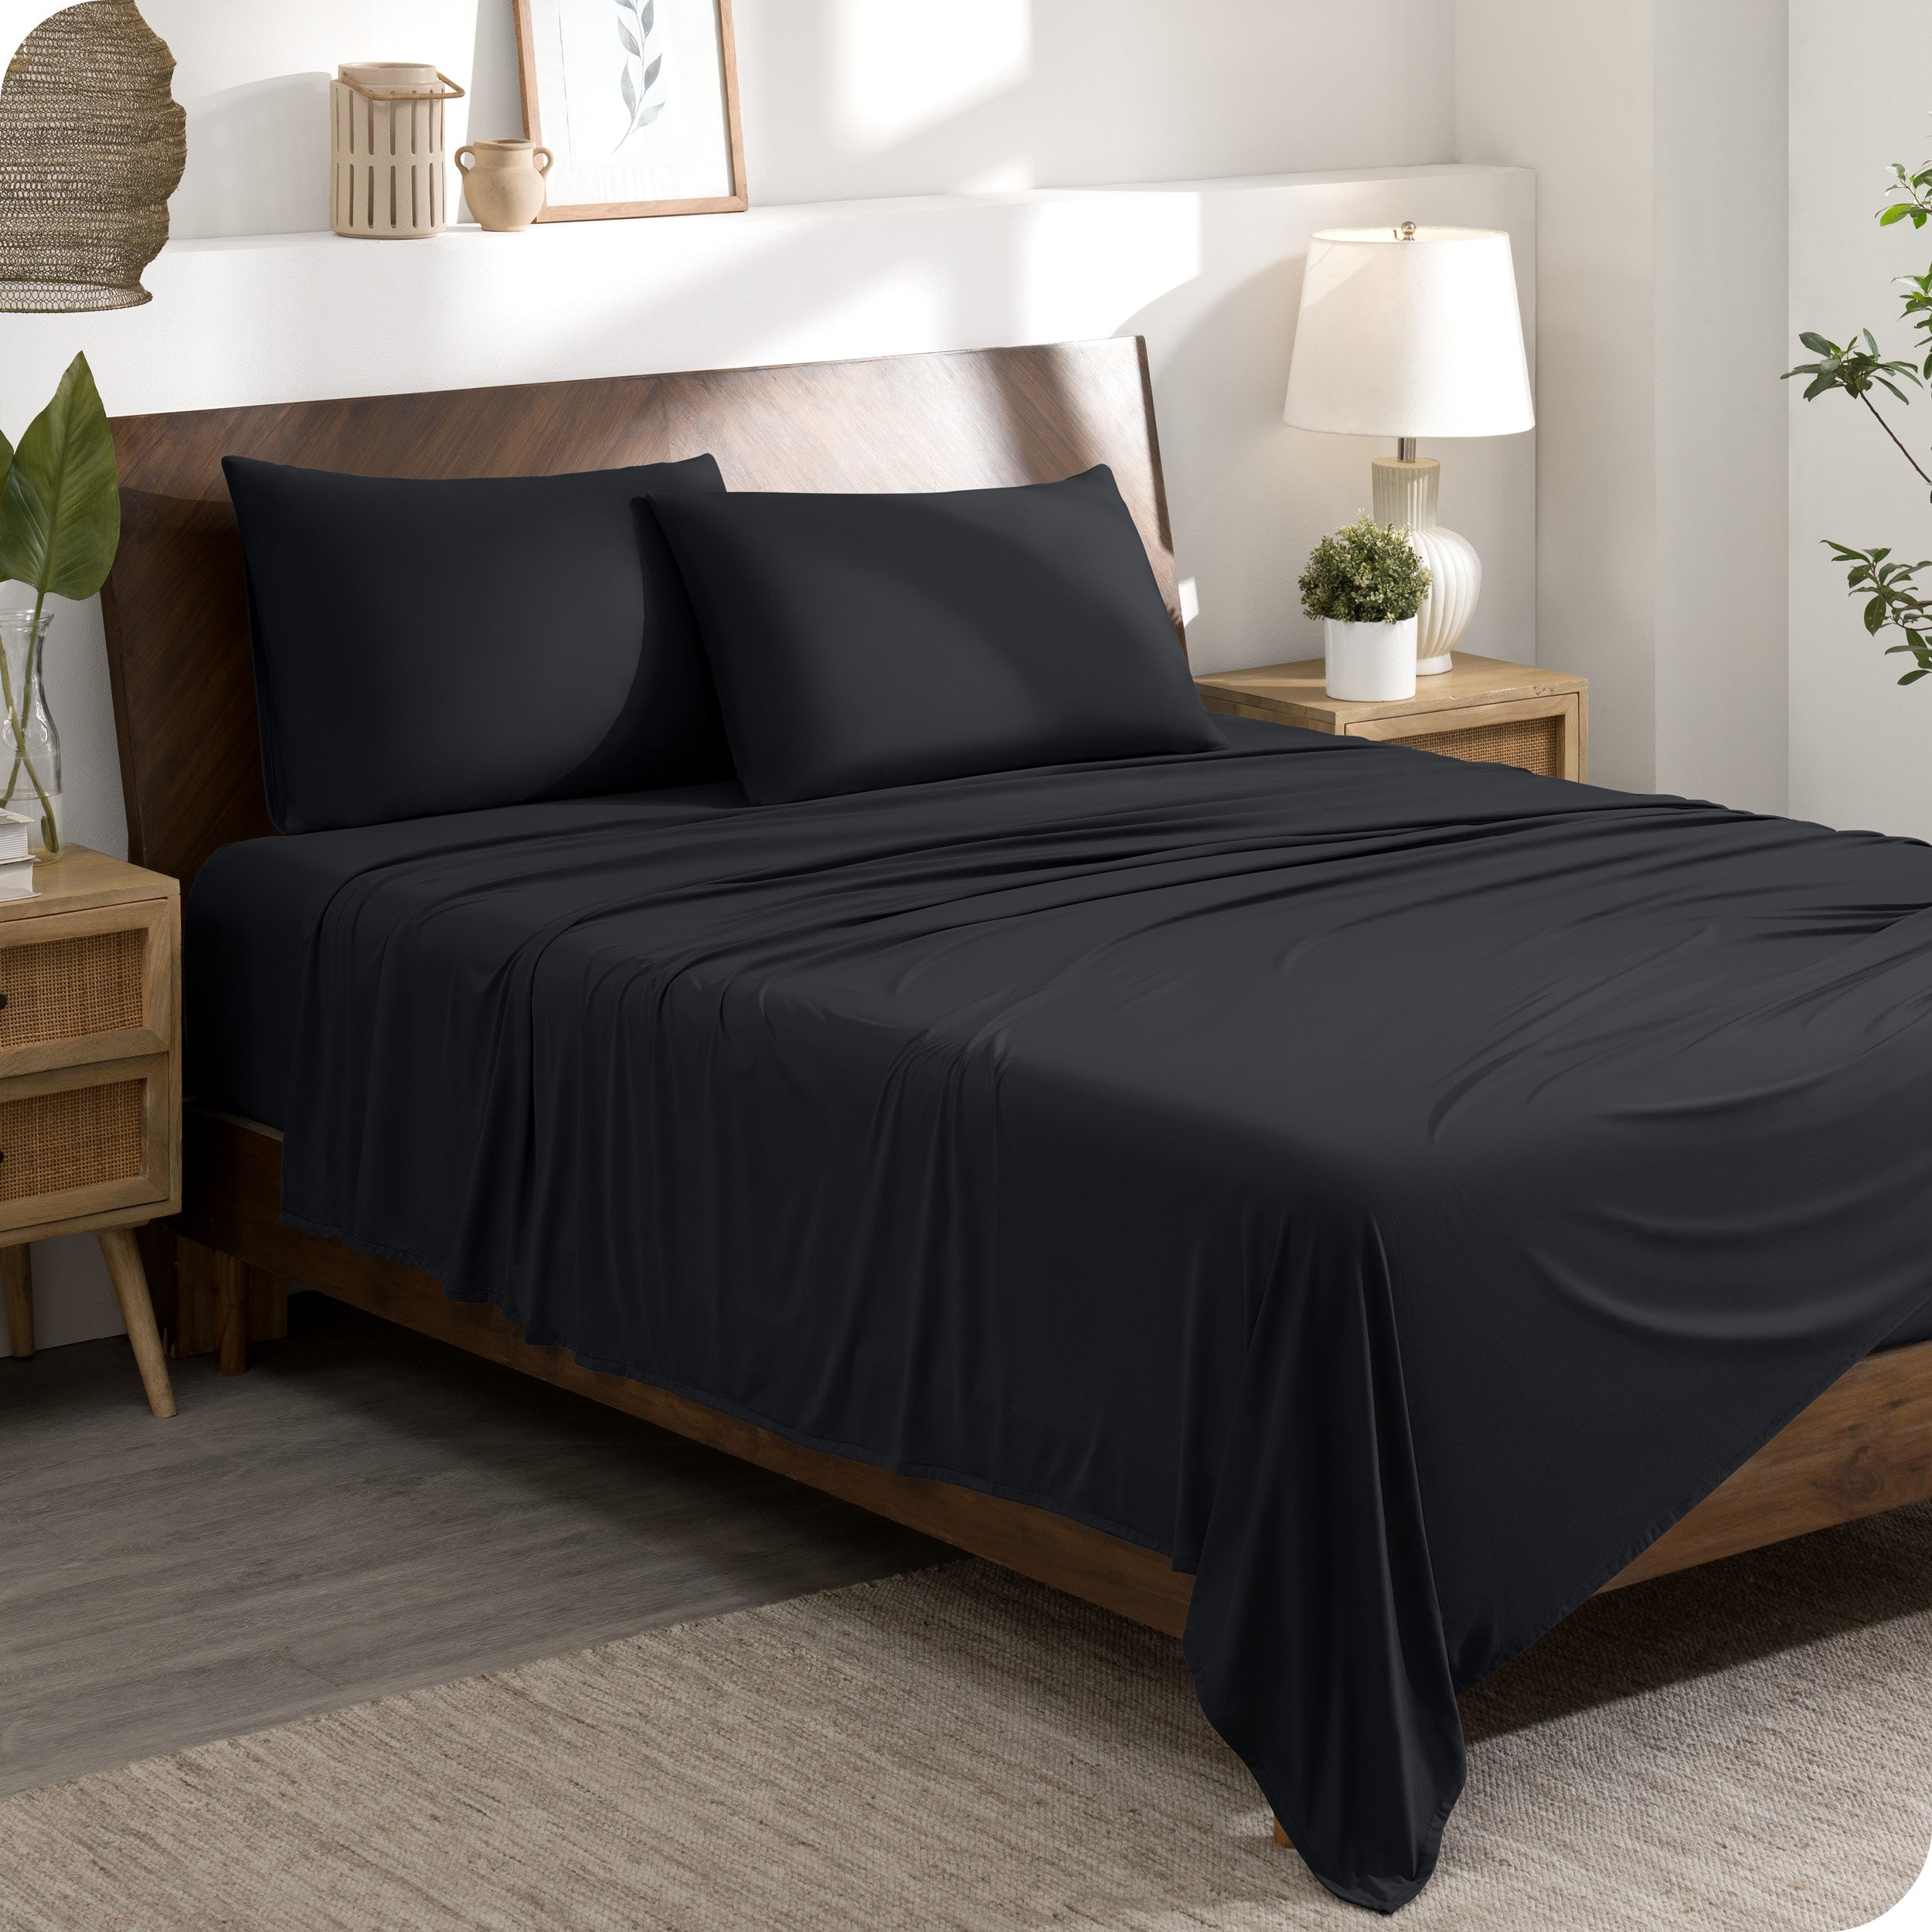 A modern bedroom set with a black sheet set on the bed